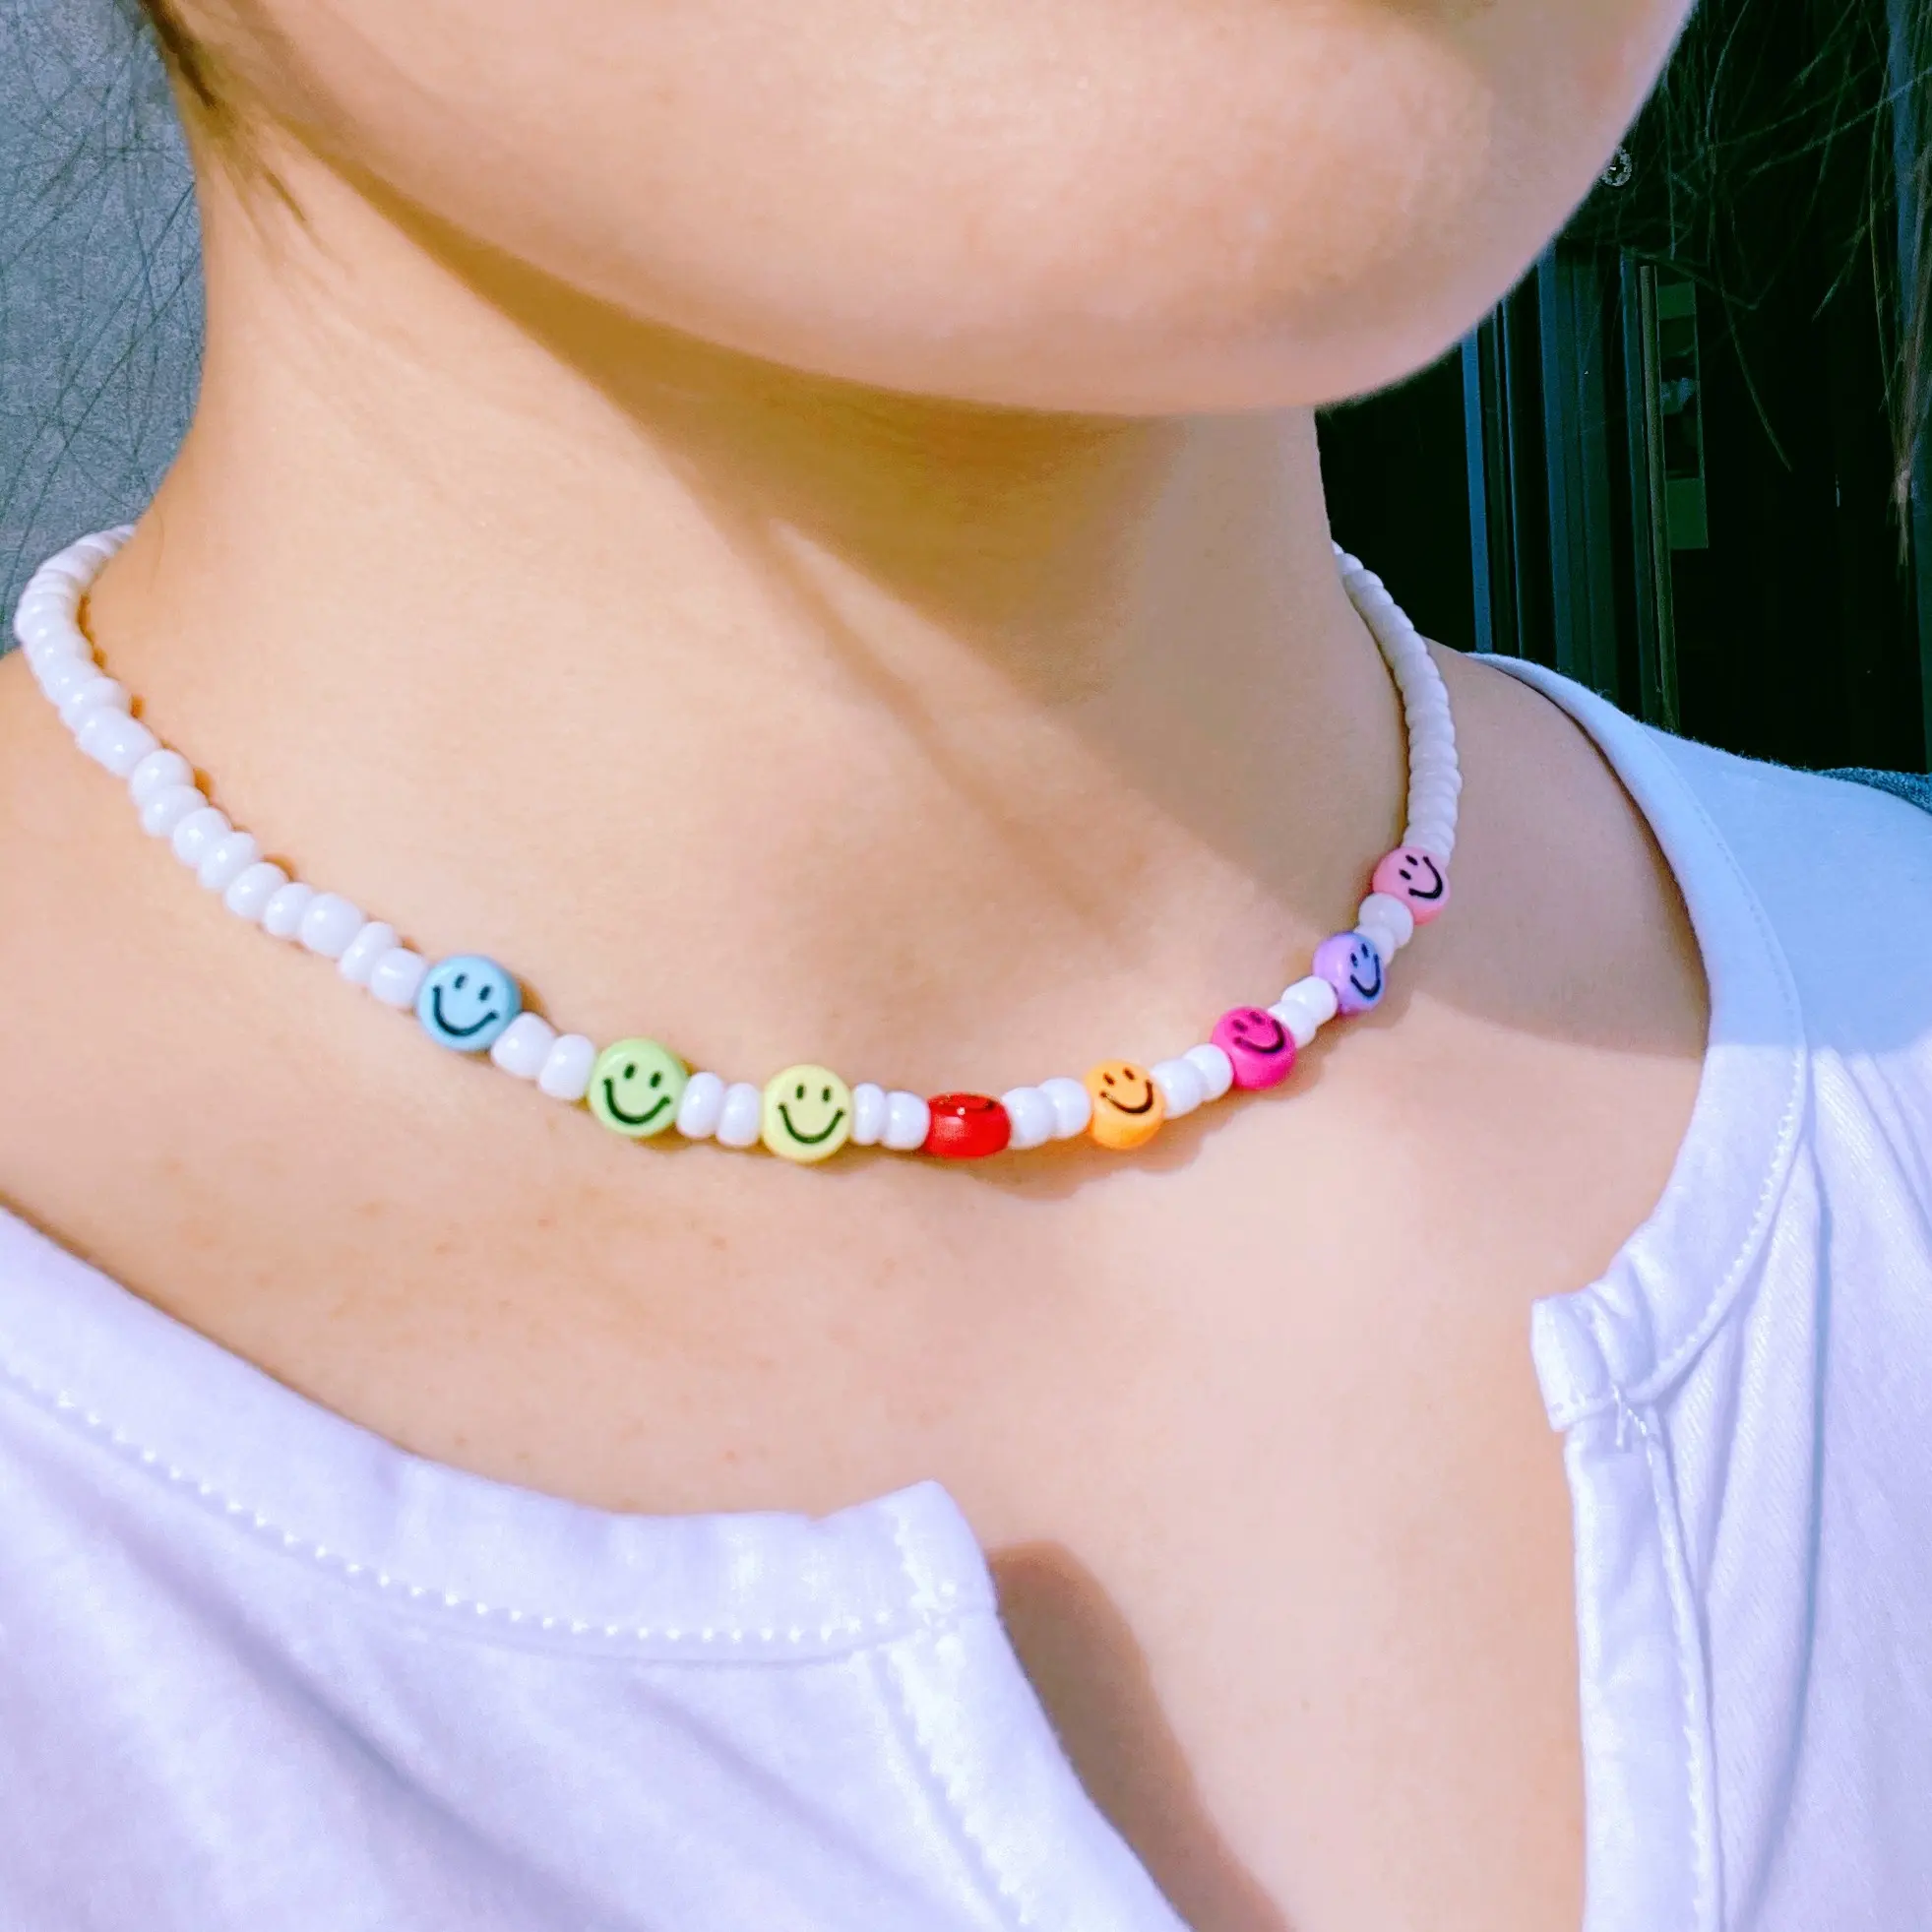 Custom Bohemia Beaded Jewelry Women White Bead Smile Face Collar Necklace Colorful Happy Face Beads Chain Choker Necklace